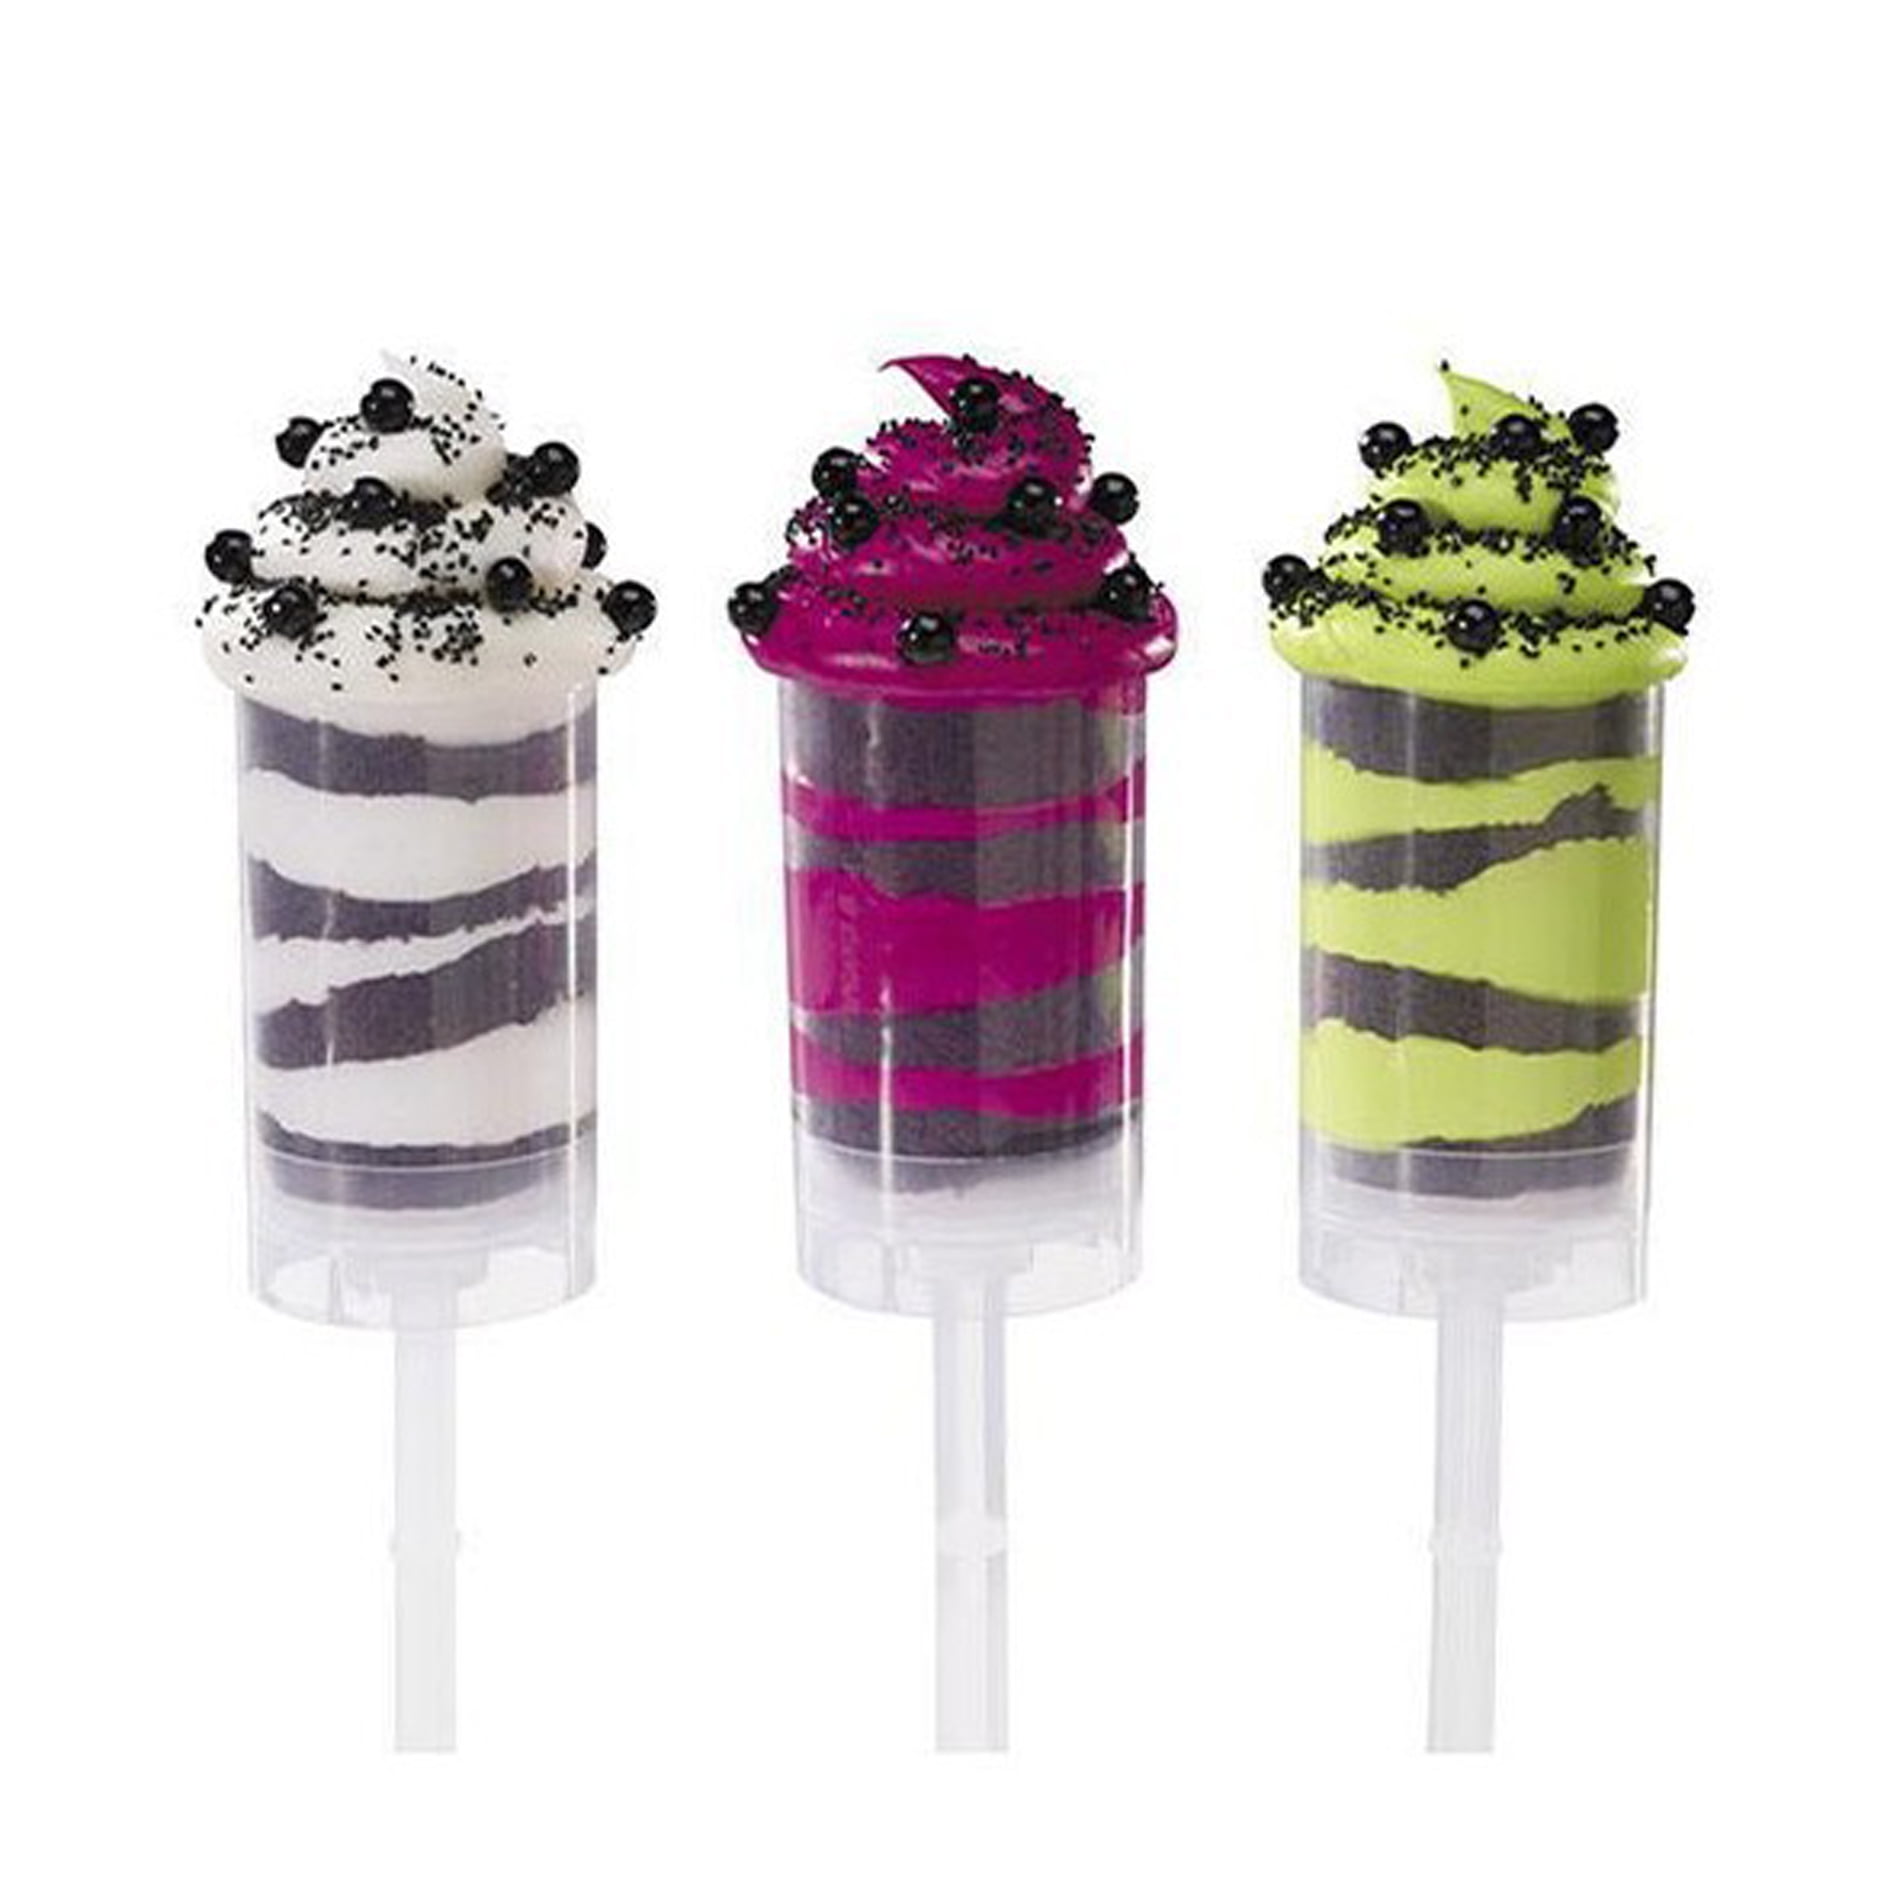 10pcs Cake Push Up Pop Holders Plunger Clear Party Cupcake Desserts Kitchen Tool